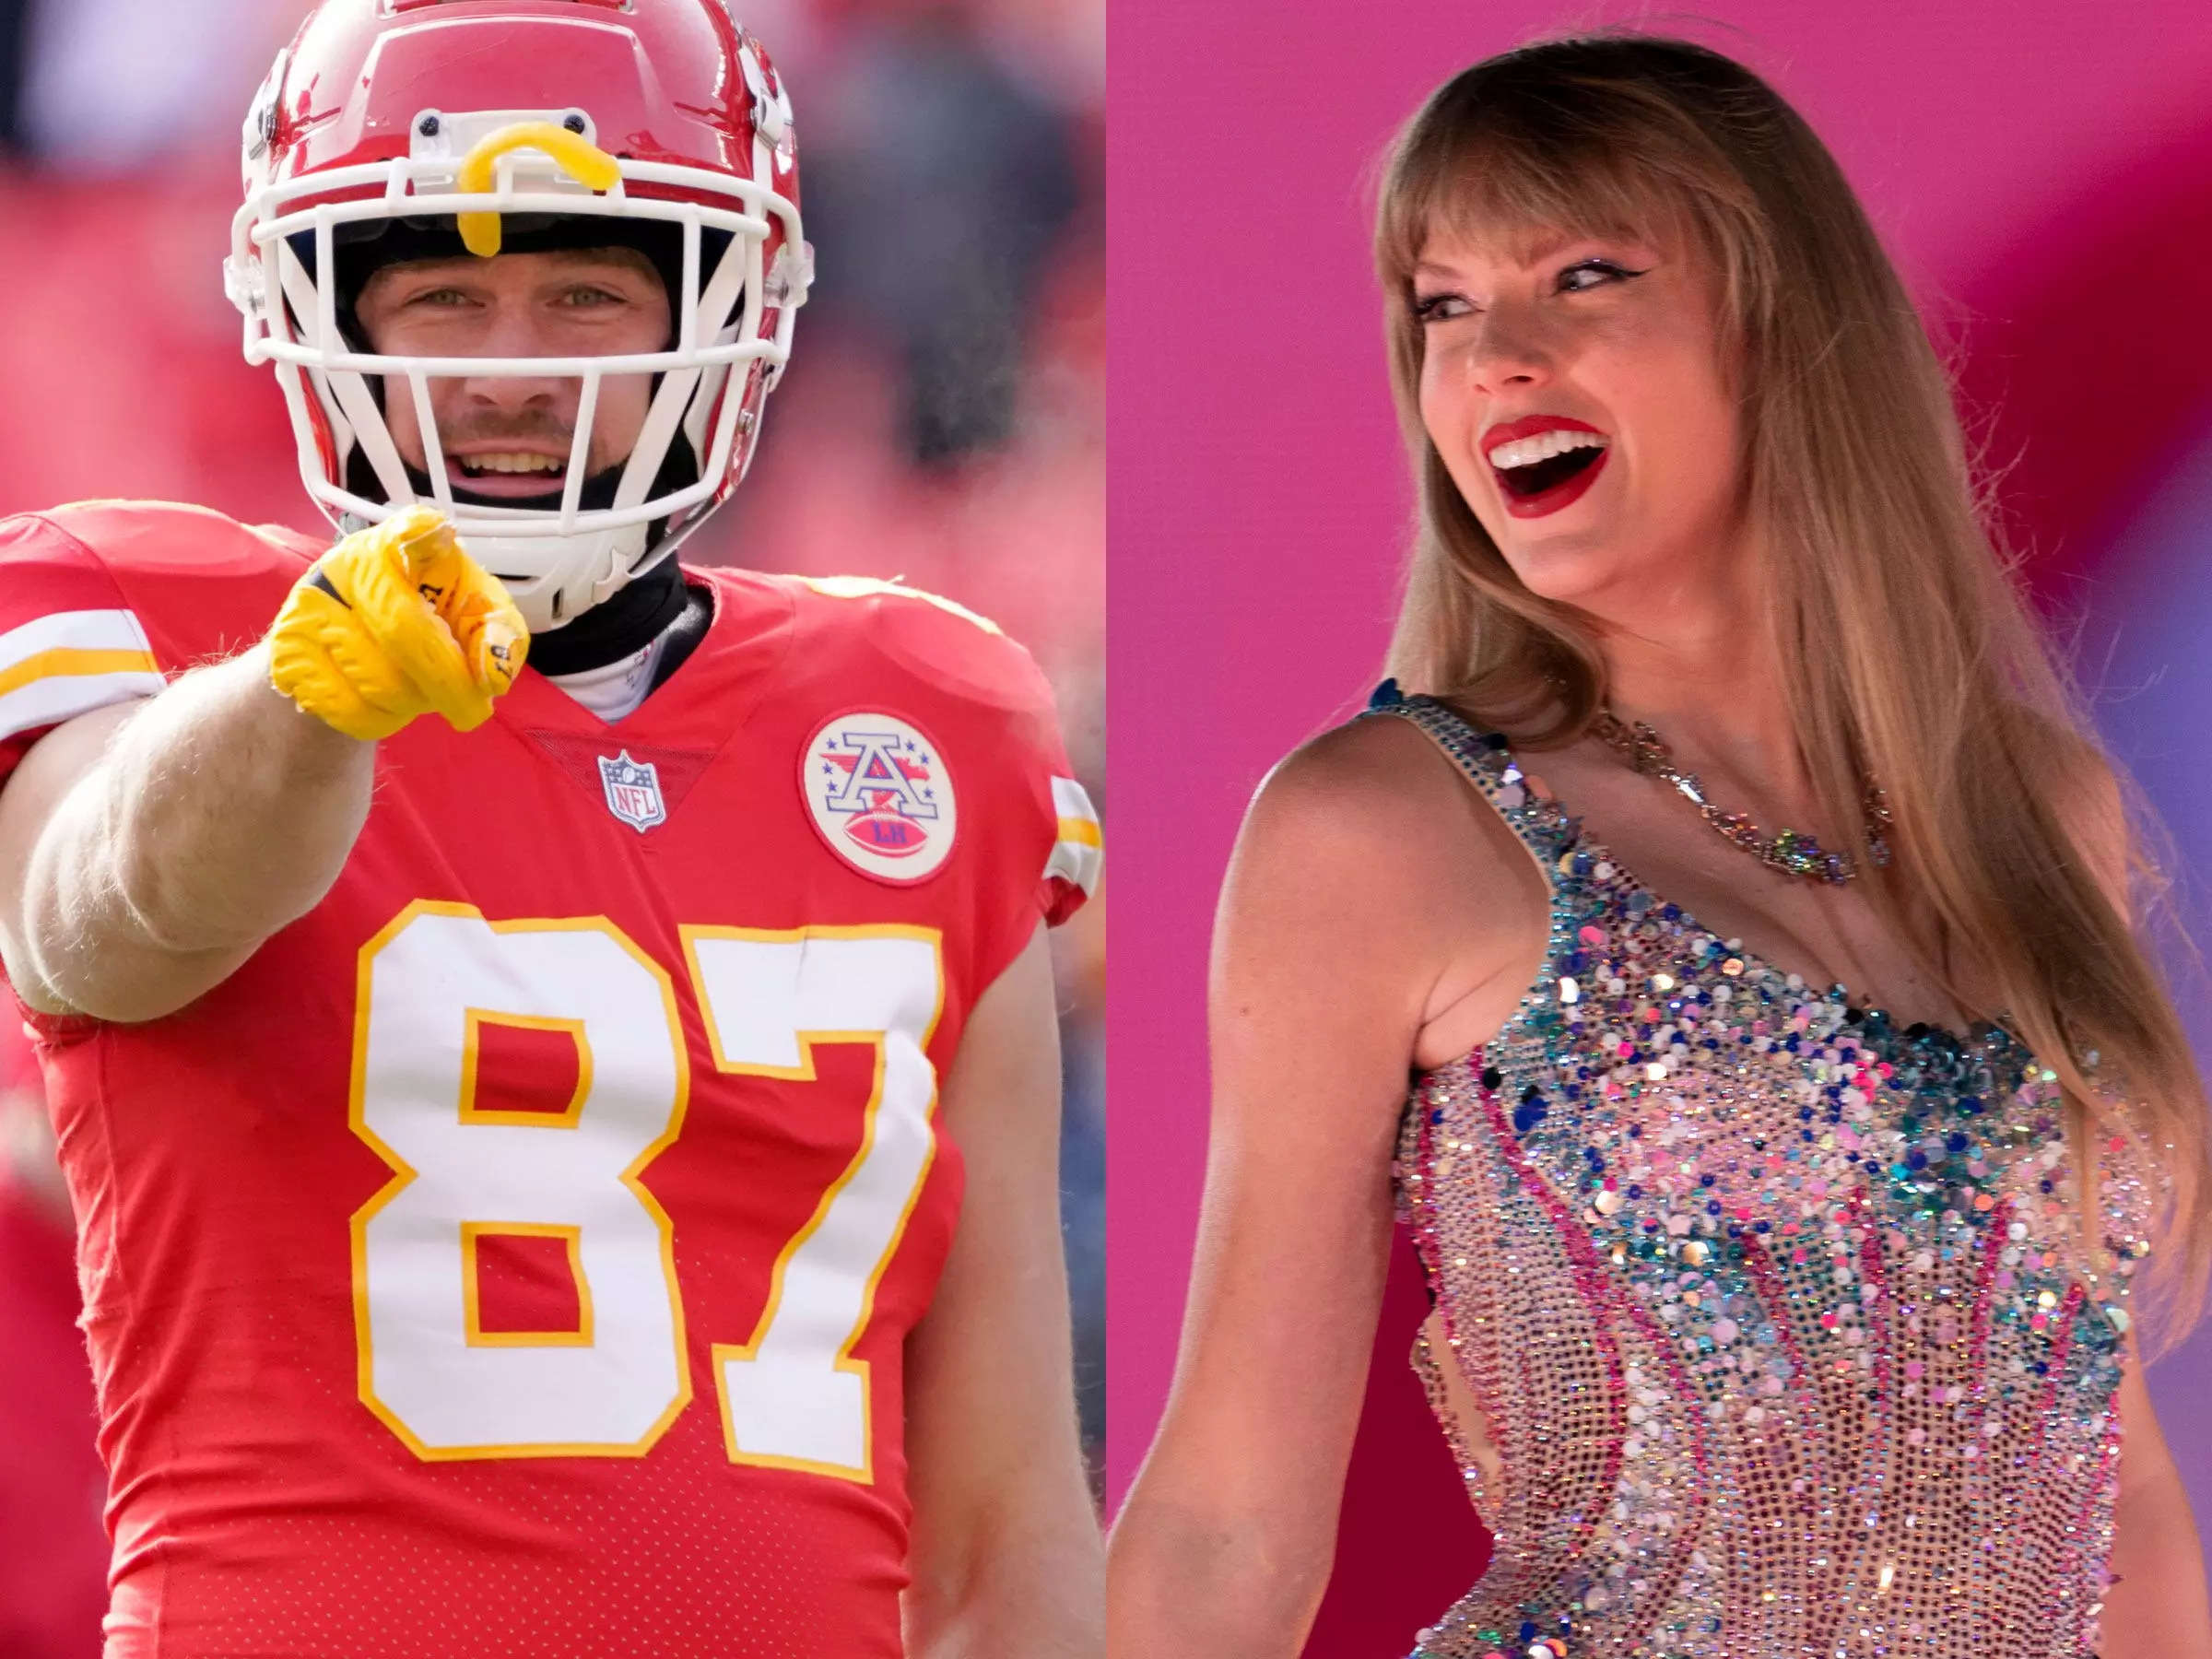 Swifties are in shock after discovering a couple dressed as Taylor